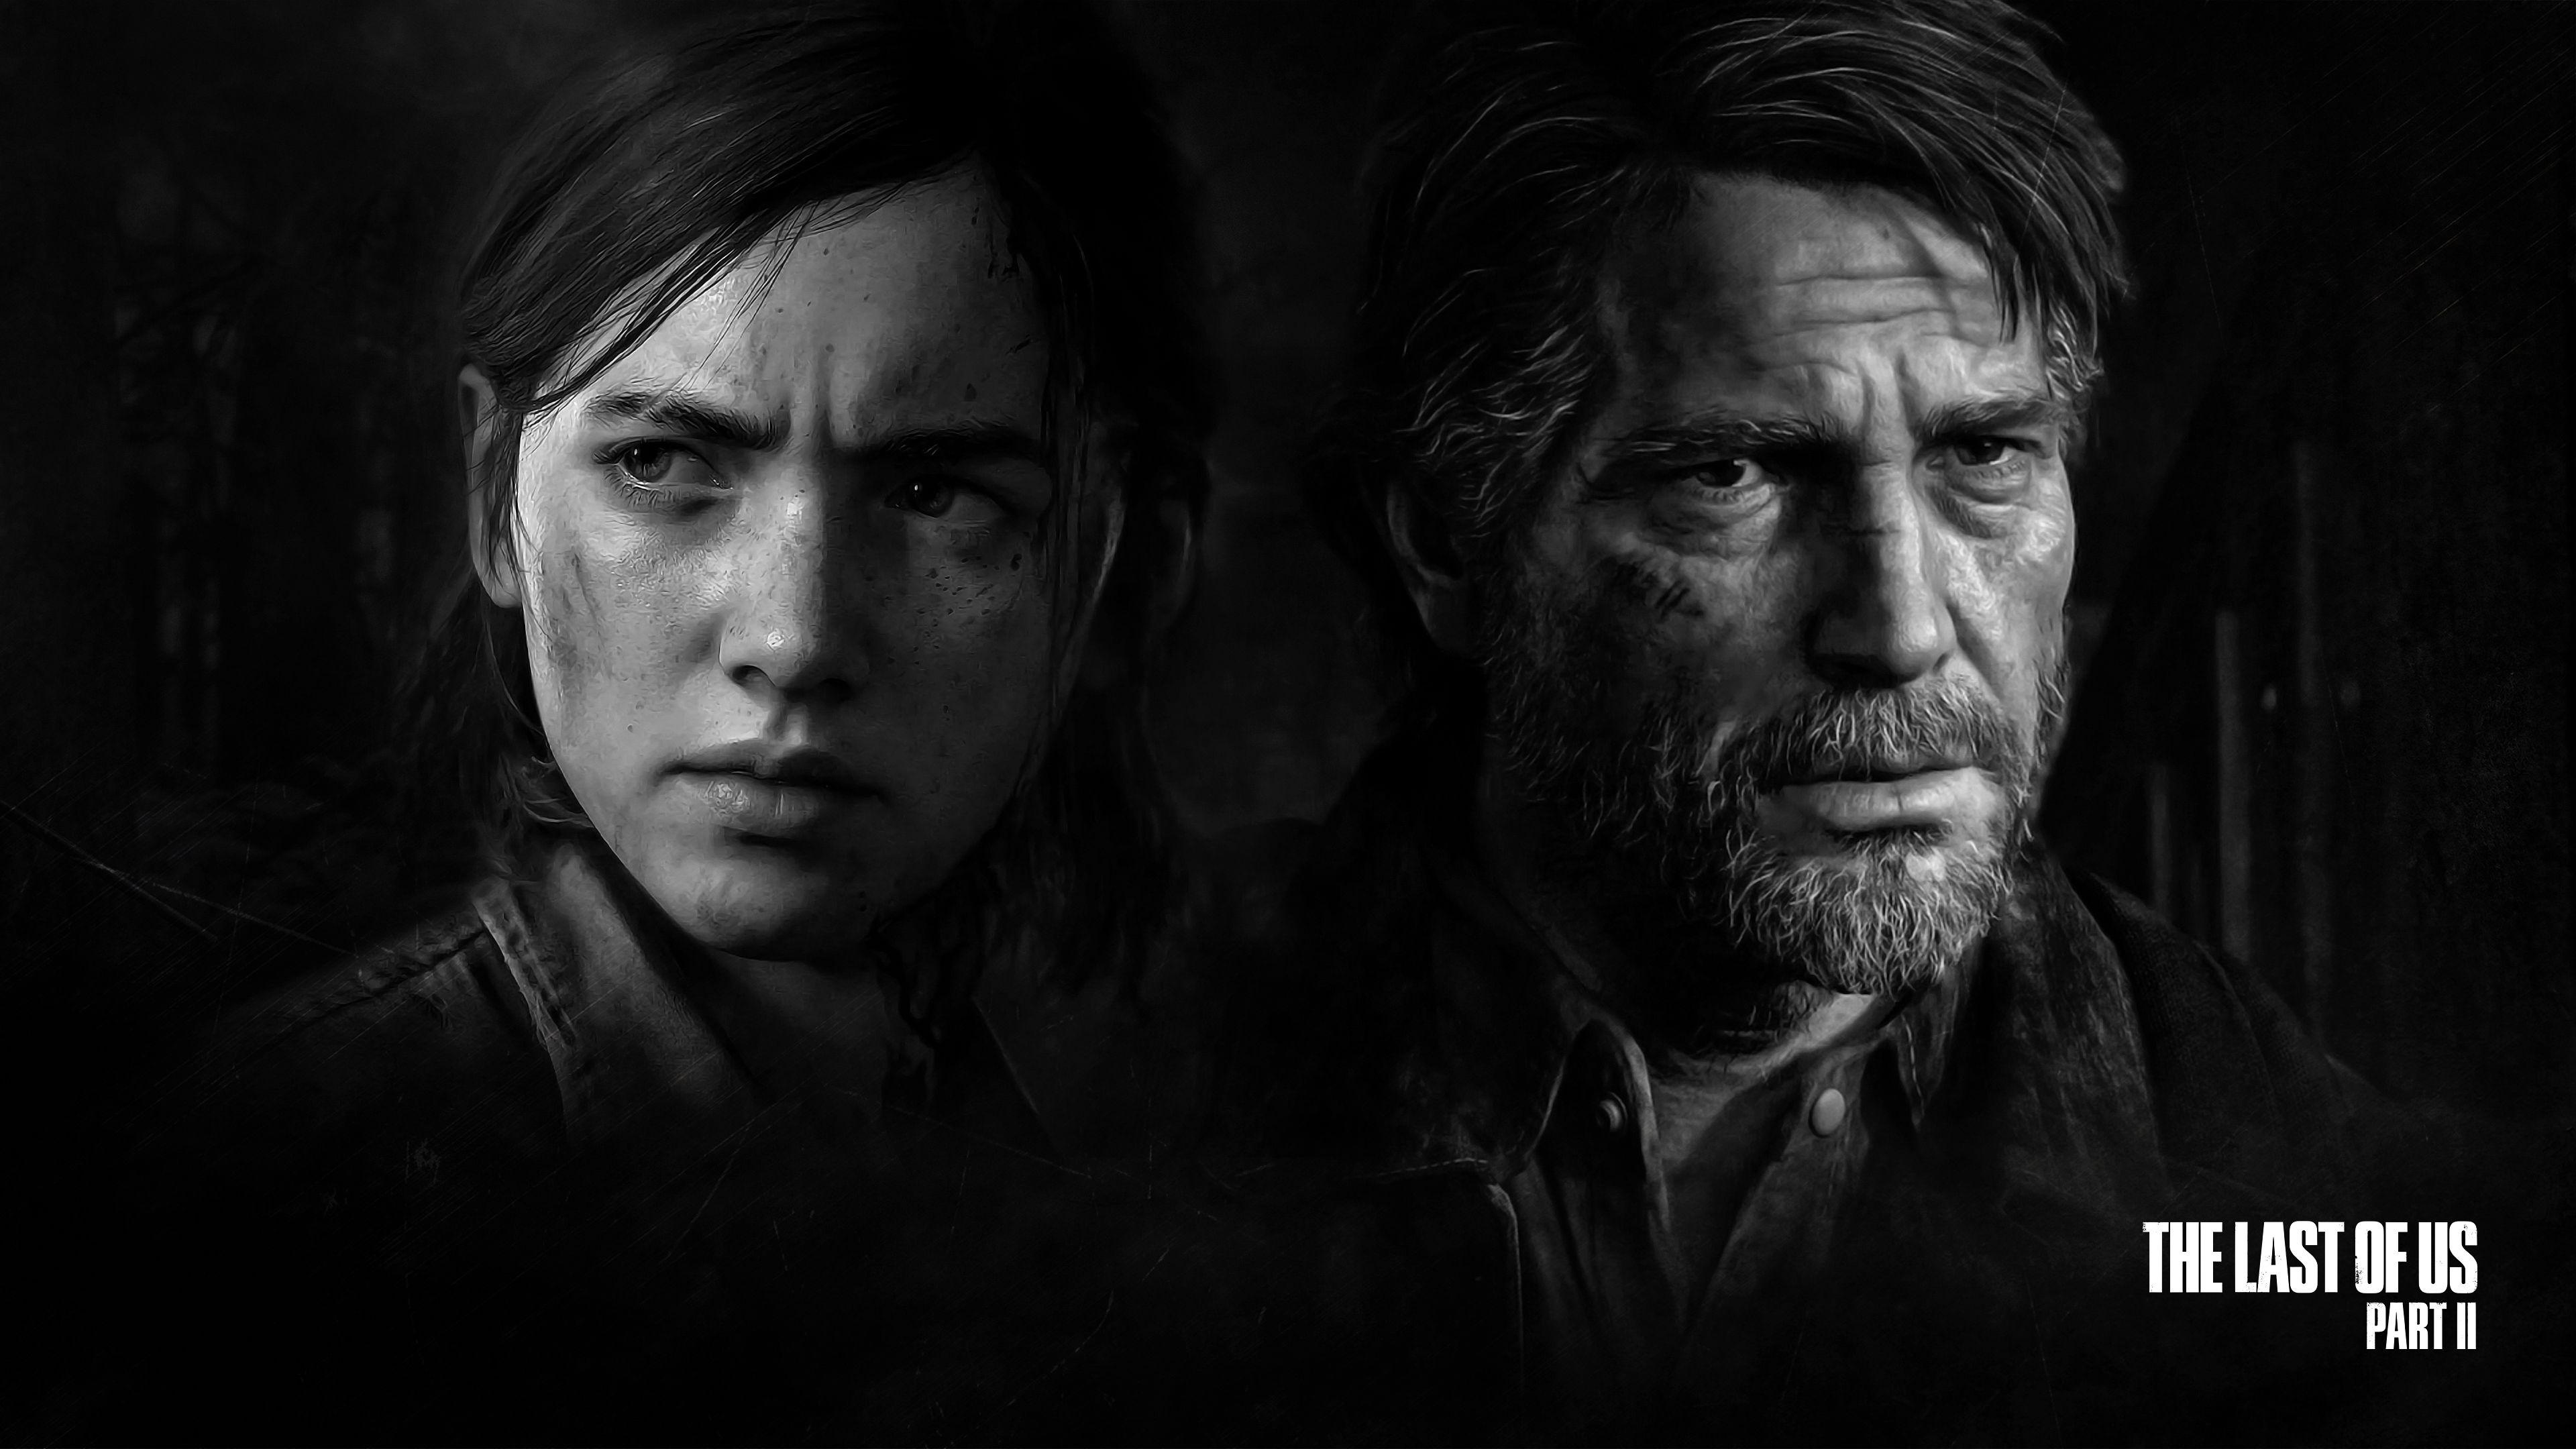 frank the last of us download free